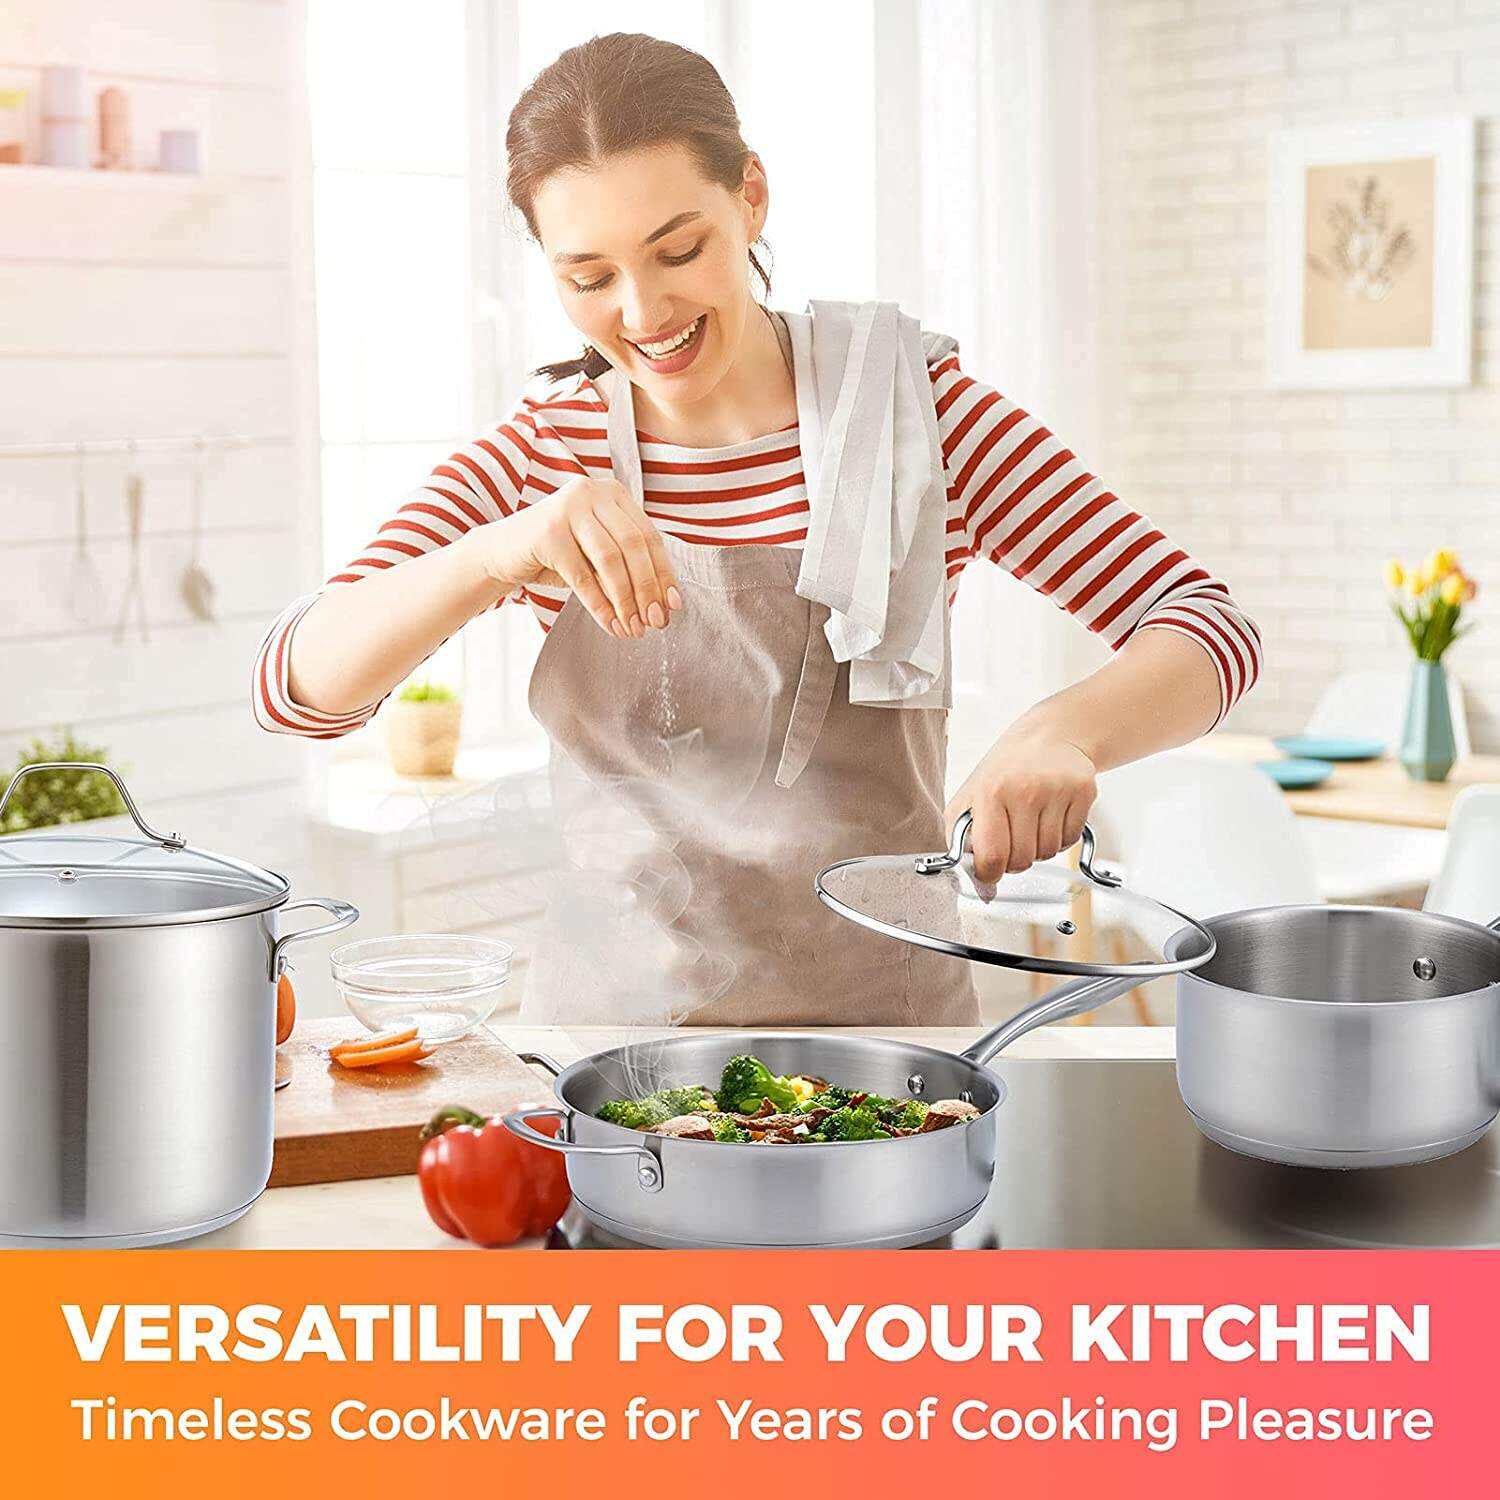 Pots and Pans Set 17-Piece. Ultra-Clad Pro Stainless Steel Cookware Set. Ergonomic and EverCool Stainless Steel Handle. Includes Saucepans. Skillets. Dutch Oven. Stockpot. Steamer and More